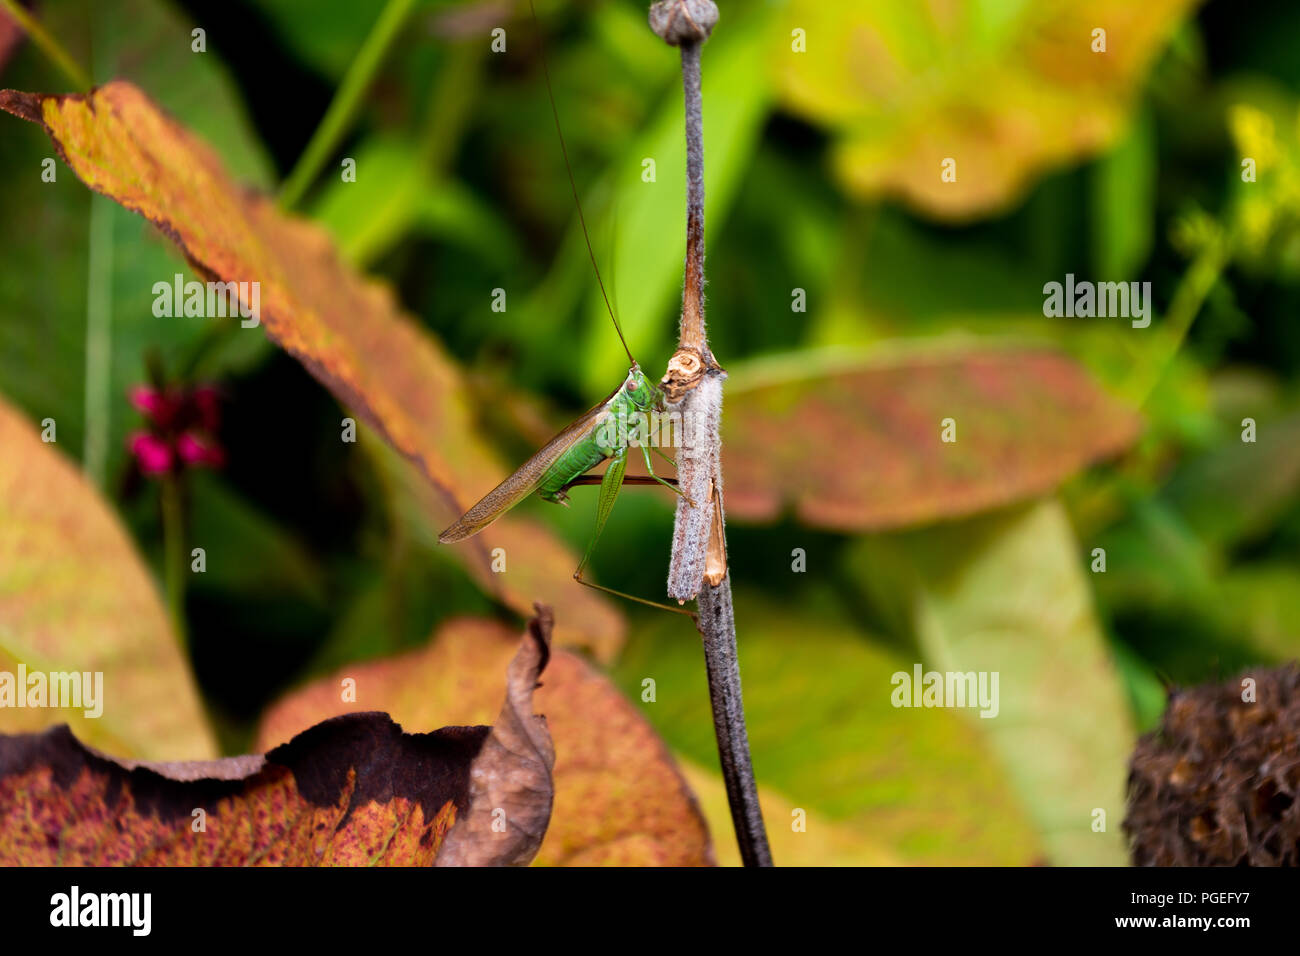 A close up of a green conehead cricket holding on to a twig Stock Photo